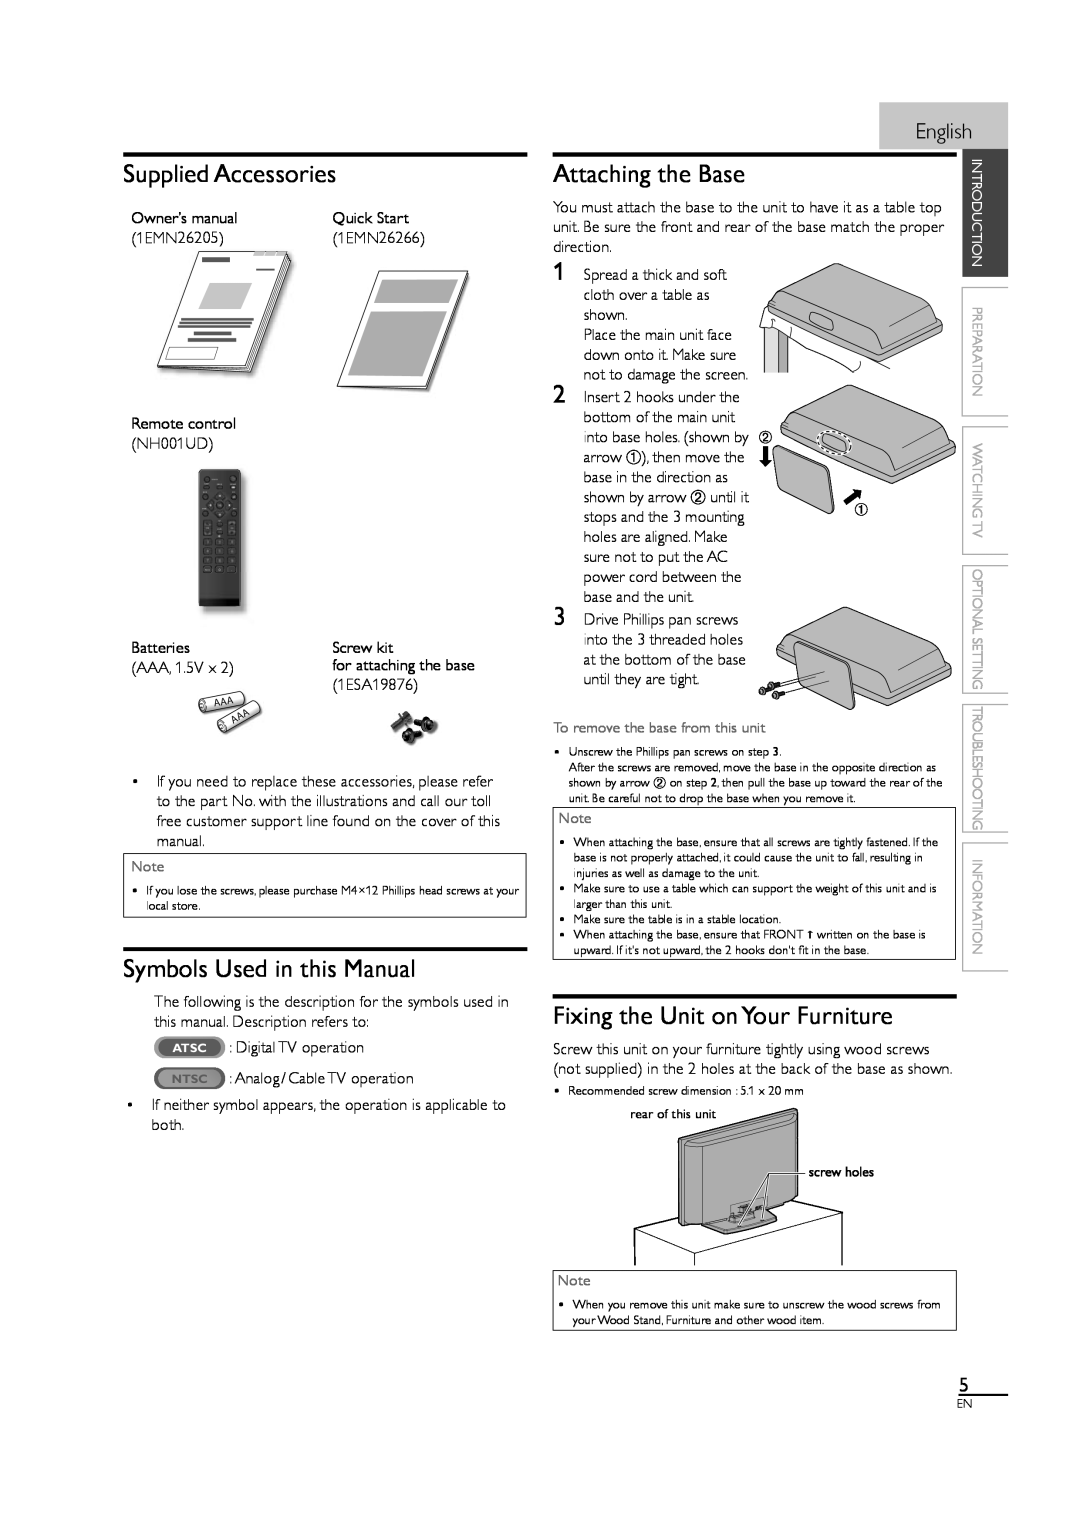 Sylvania LC190SL1 Supplied Accessories, Symbols Used in this Manual, Attaching the Base, Fixing the Unit on Your Furniture 